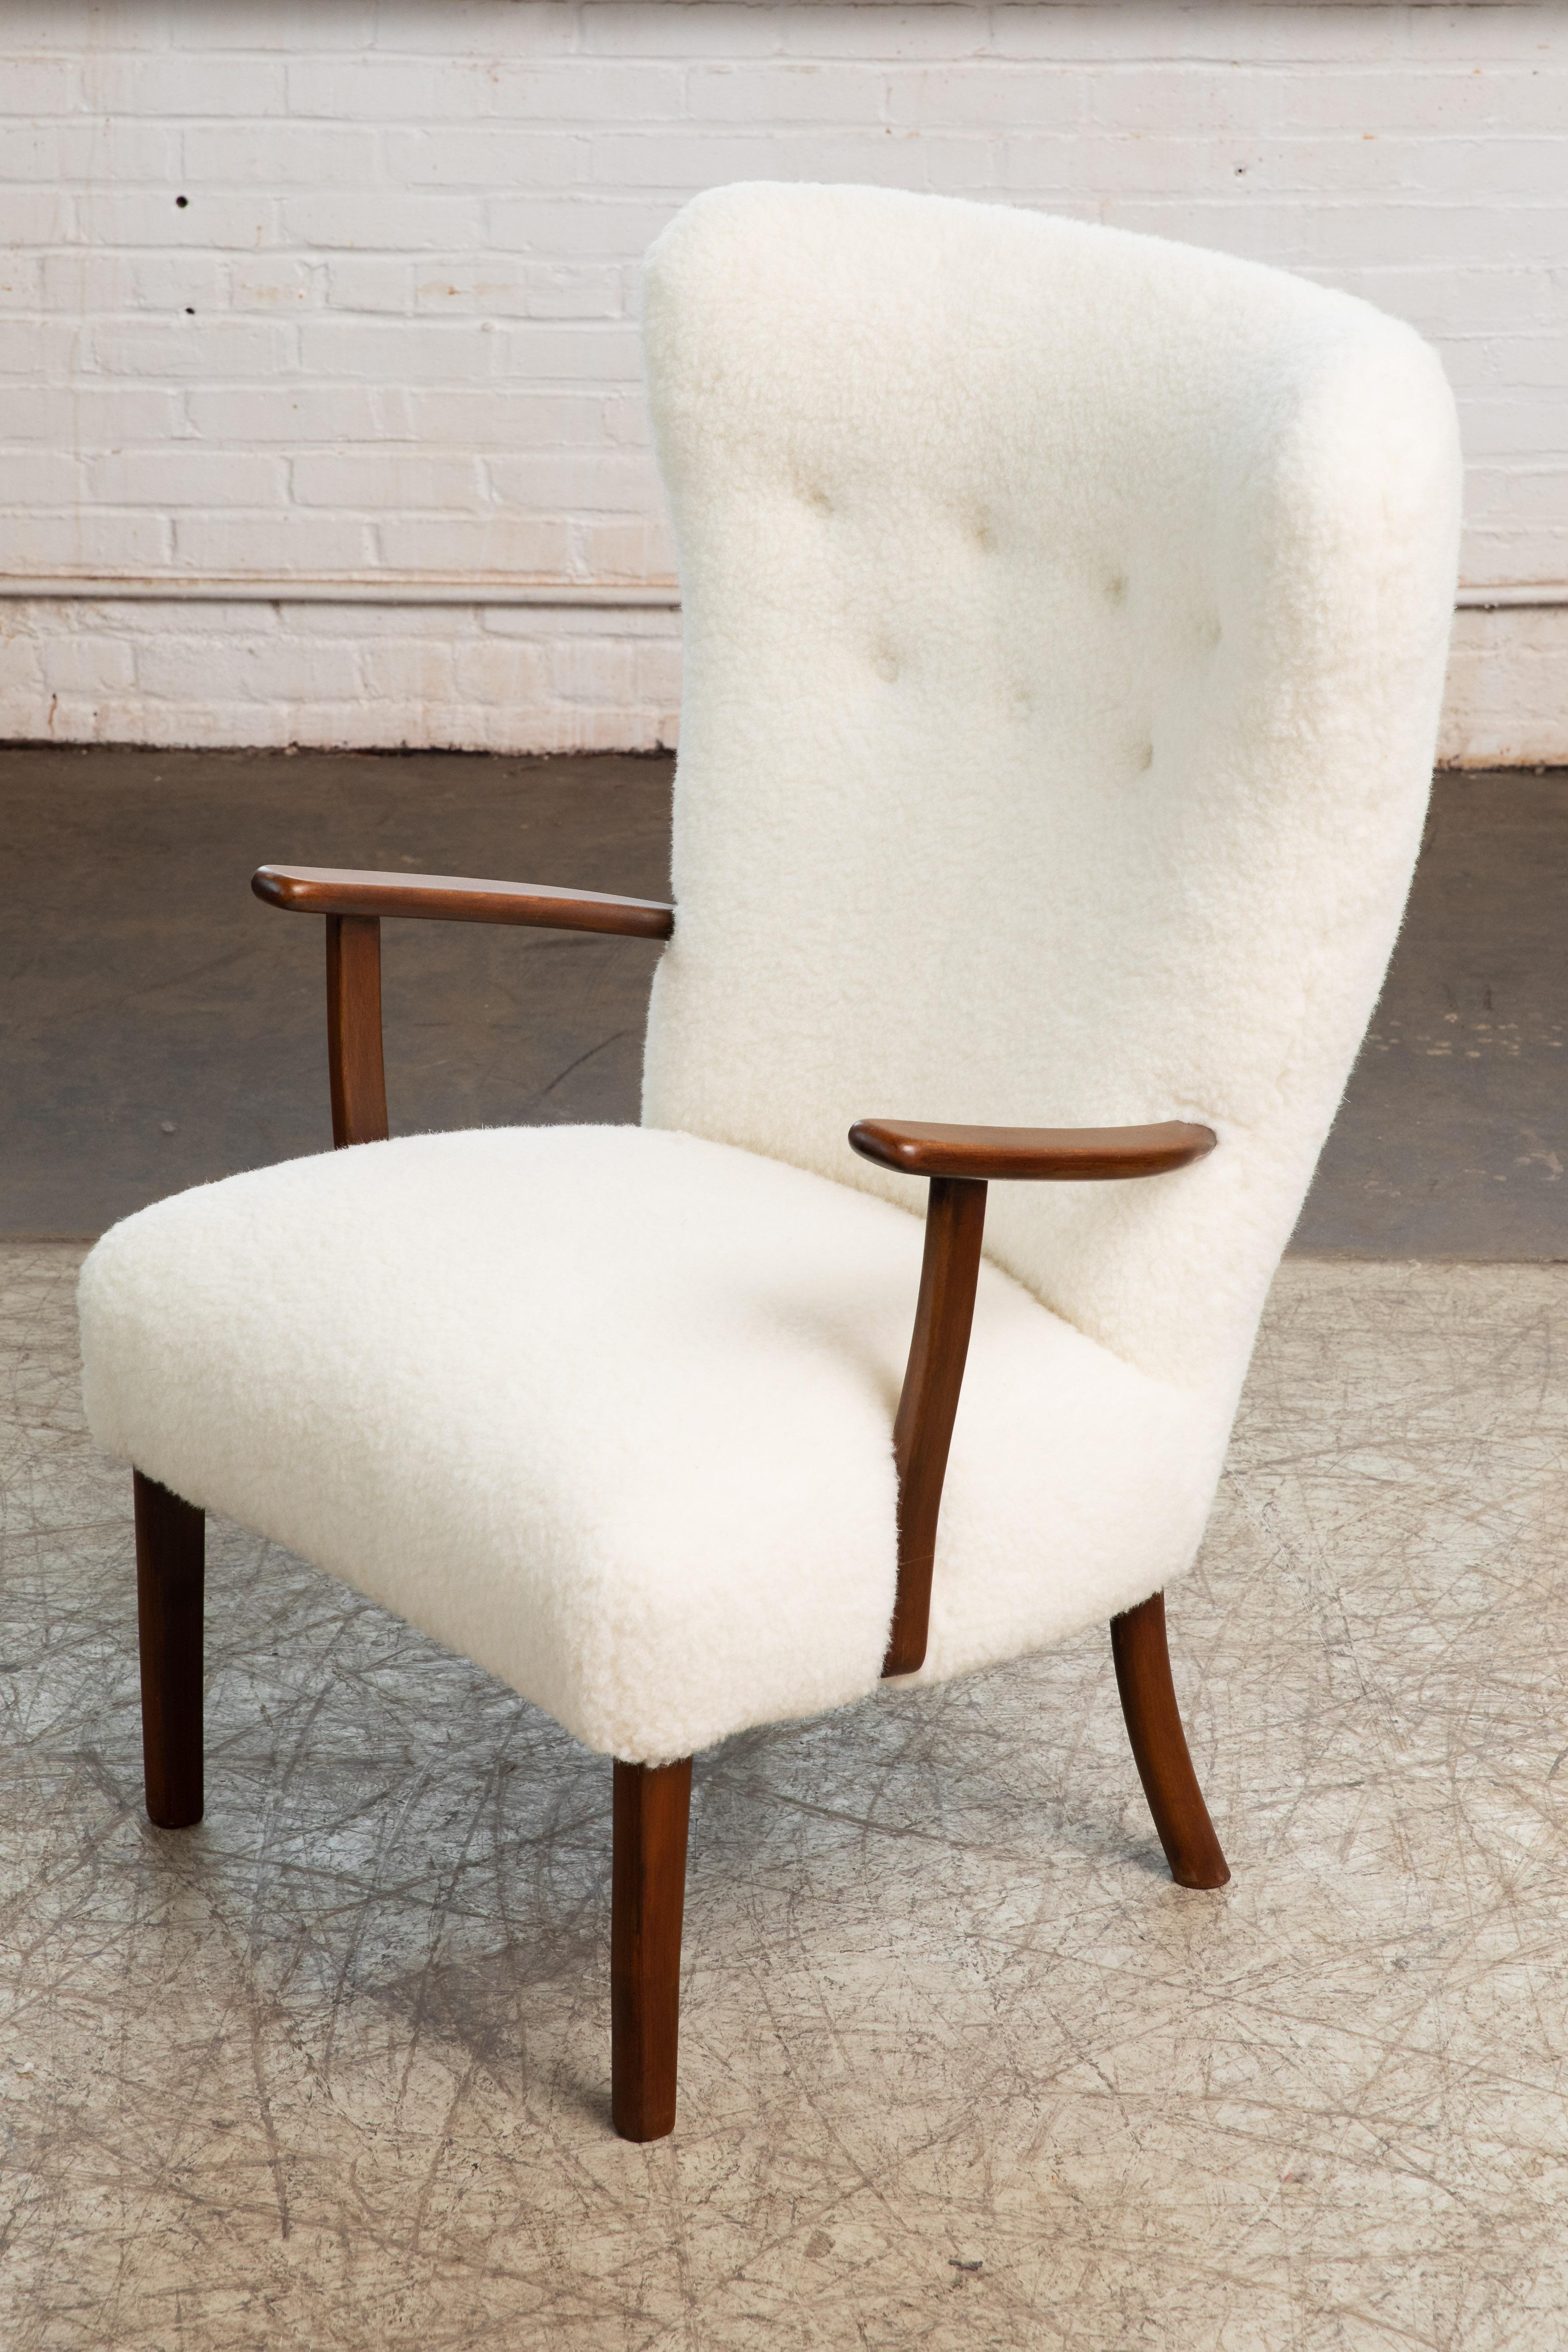 Beautiful Danish 1950s highback lounge chair with open armrests in stained beechwood model 1644 by Frits Hansen Marked by the Maker. Light elegant silhouette while still sturdy and strong. Fully refurbished and newly upholstered in a smooth